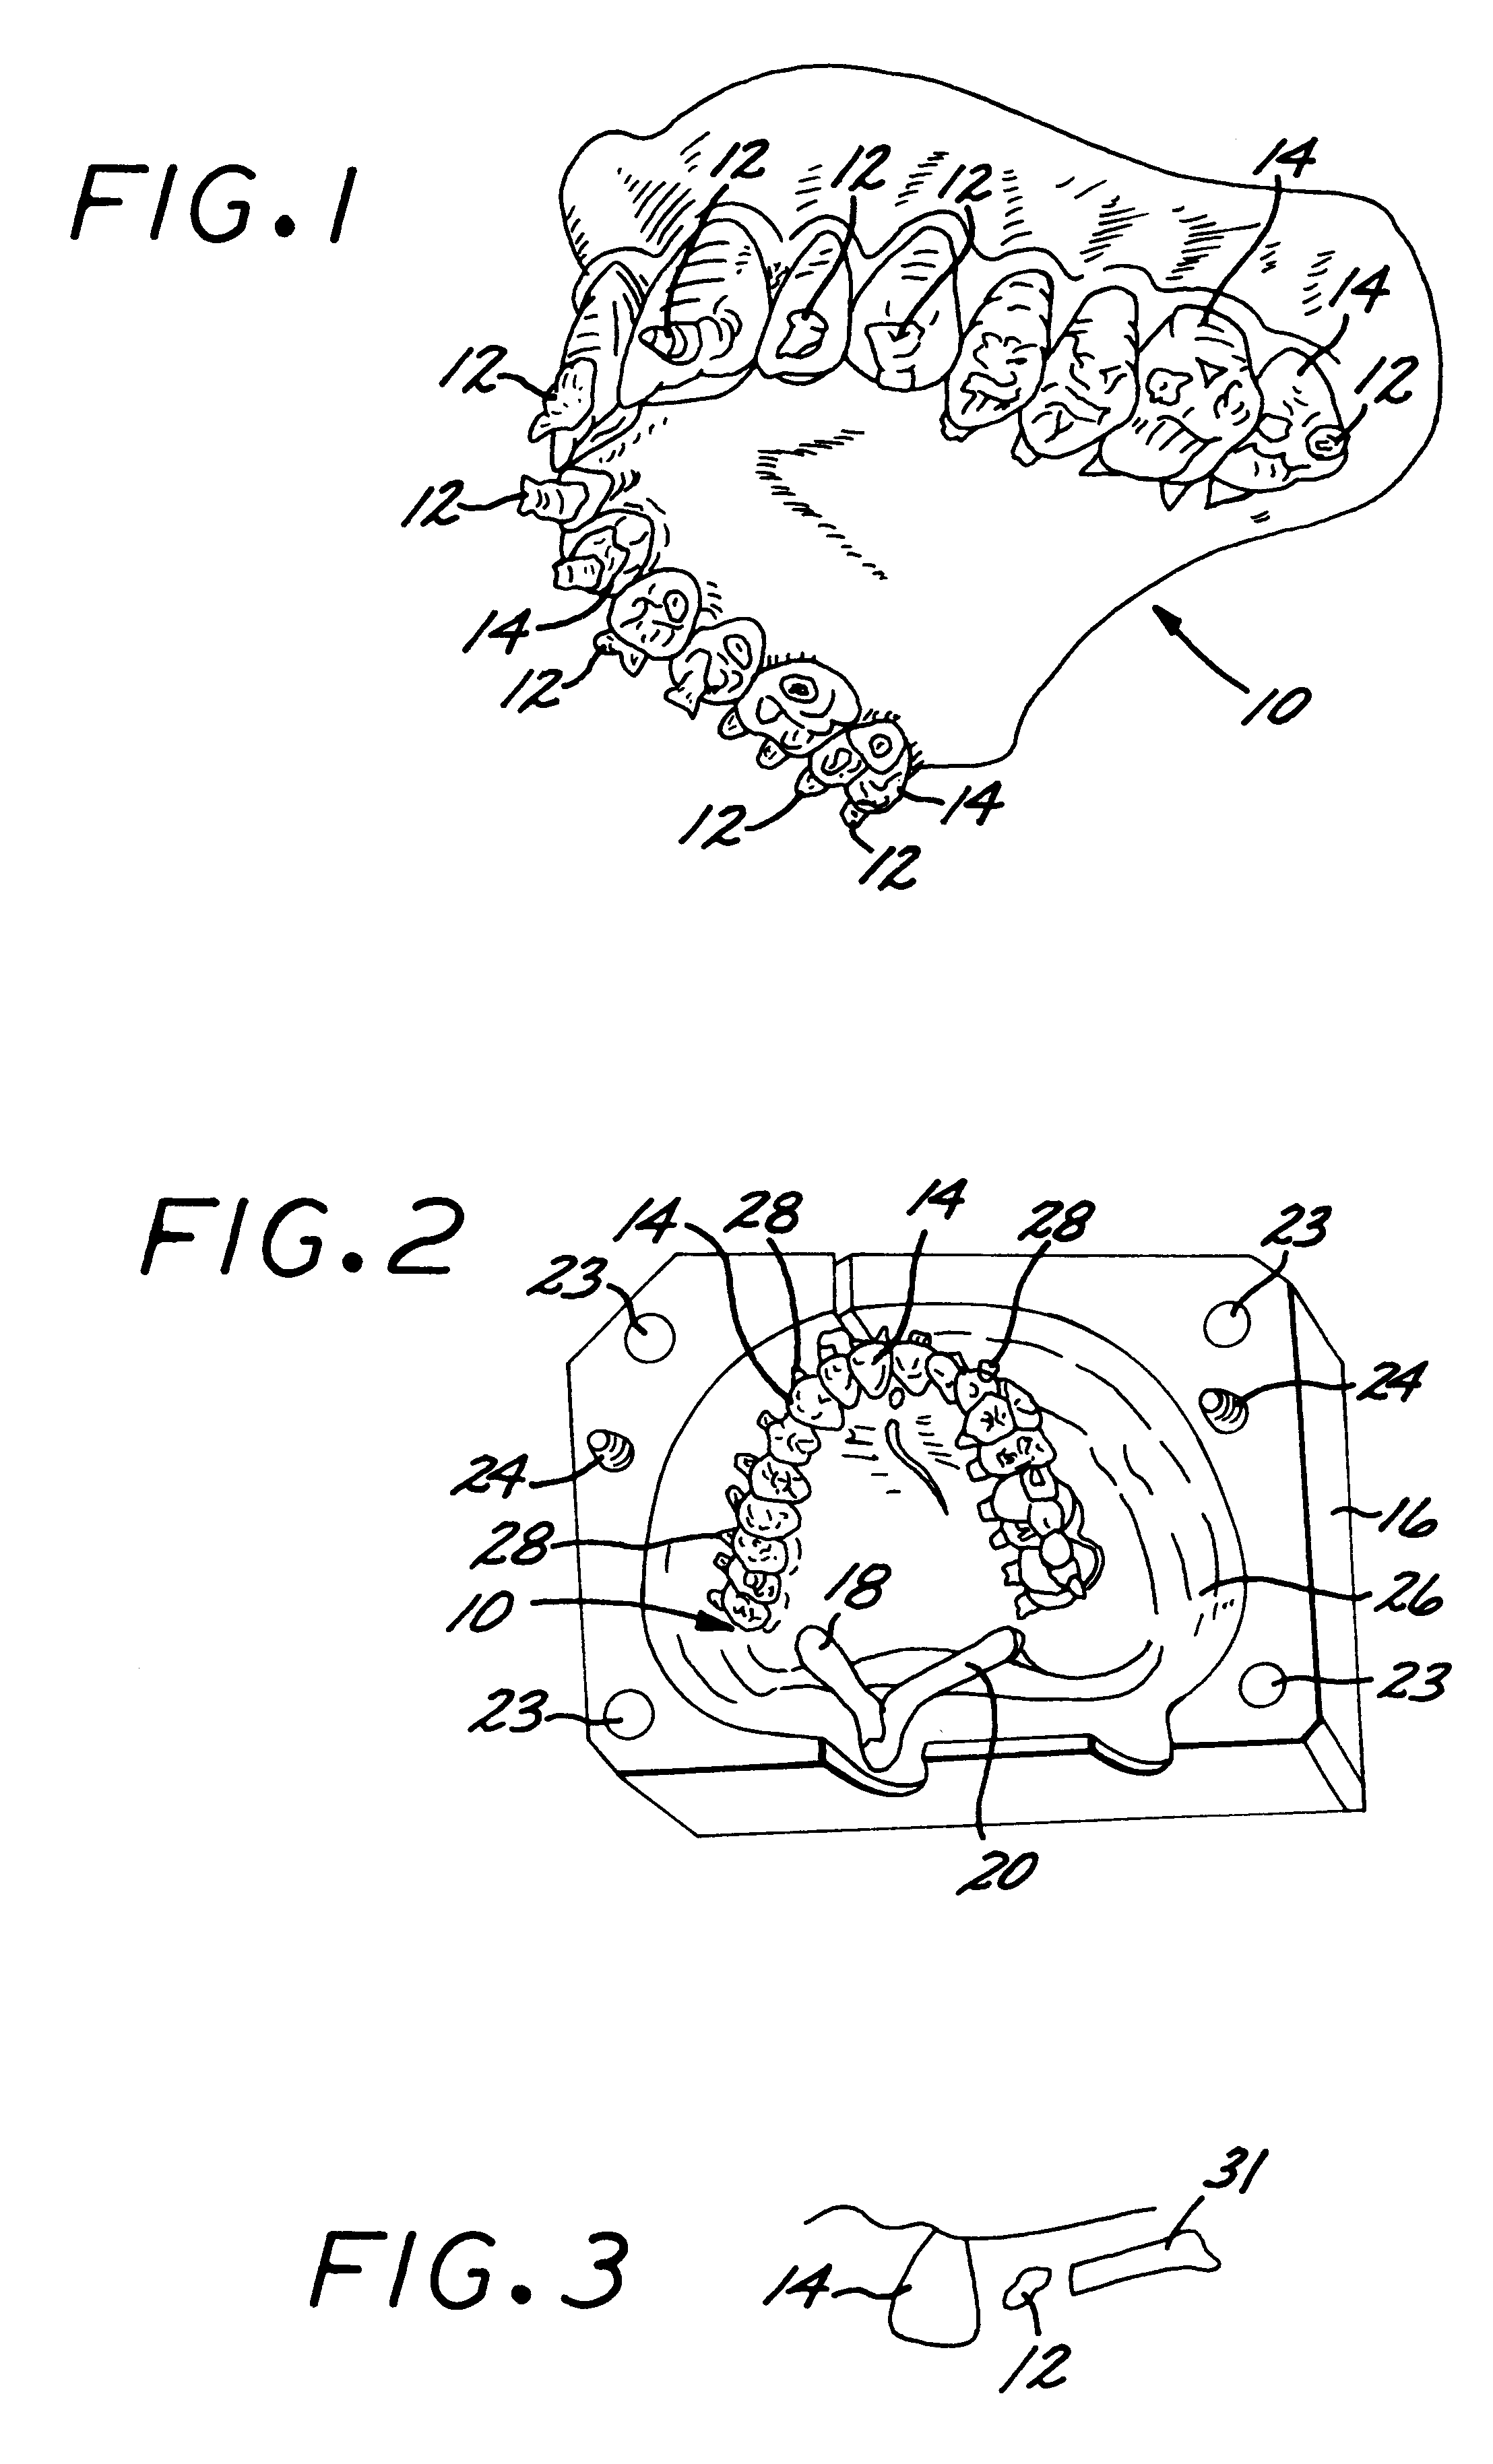 Method for fabricating removable denture prothesis using injection molding